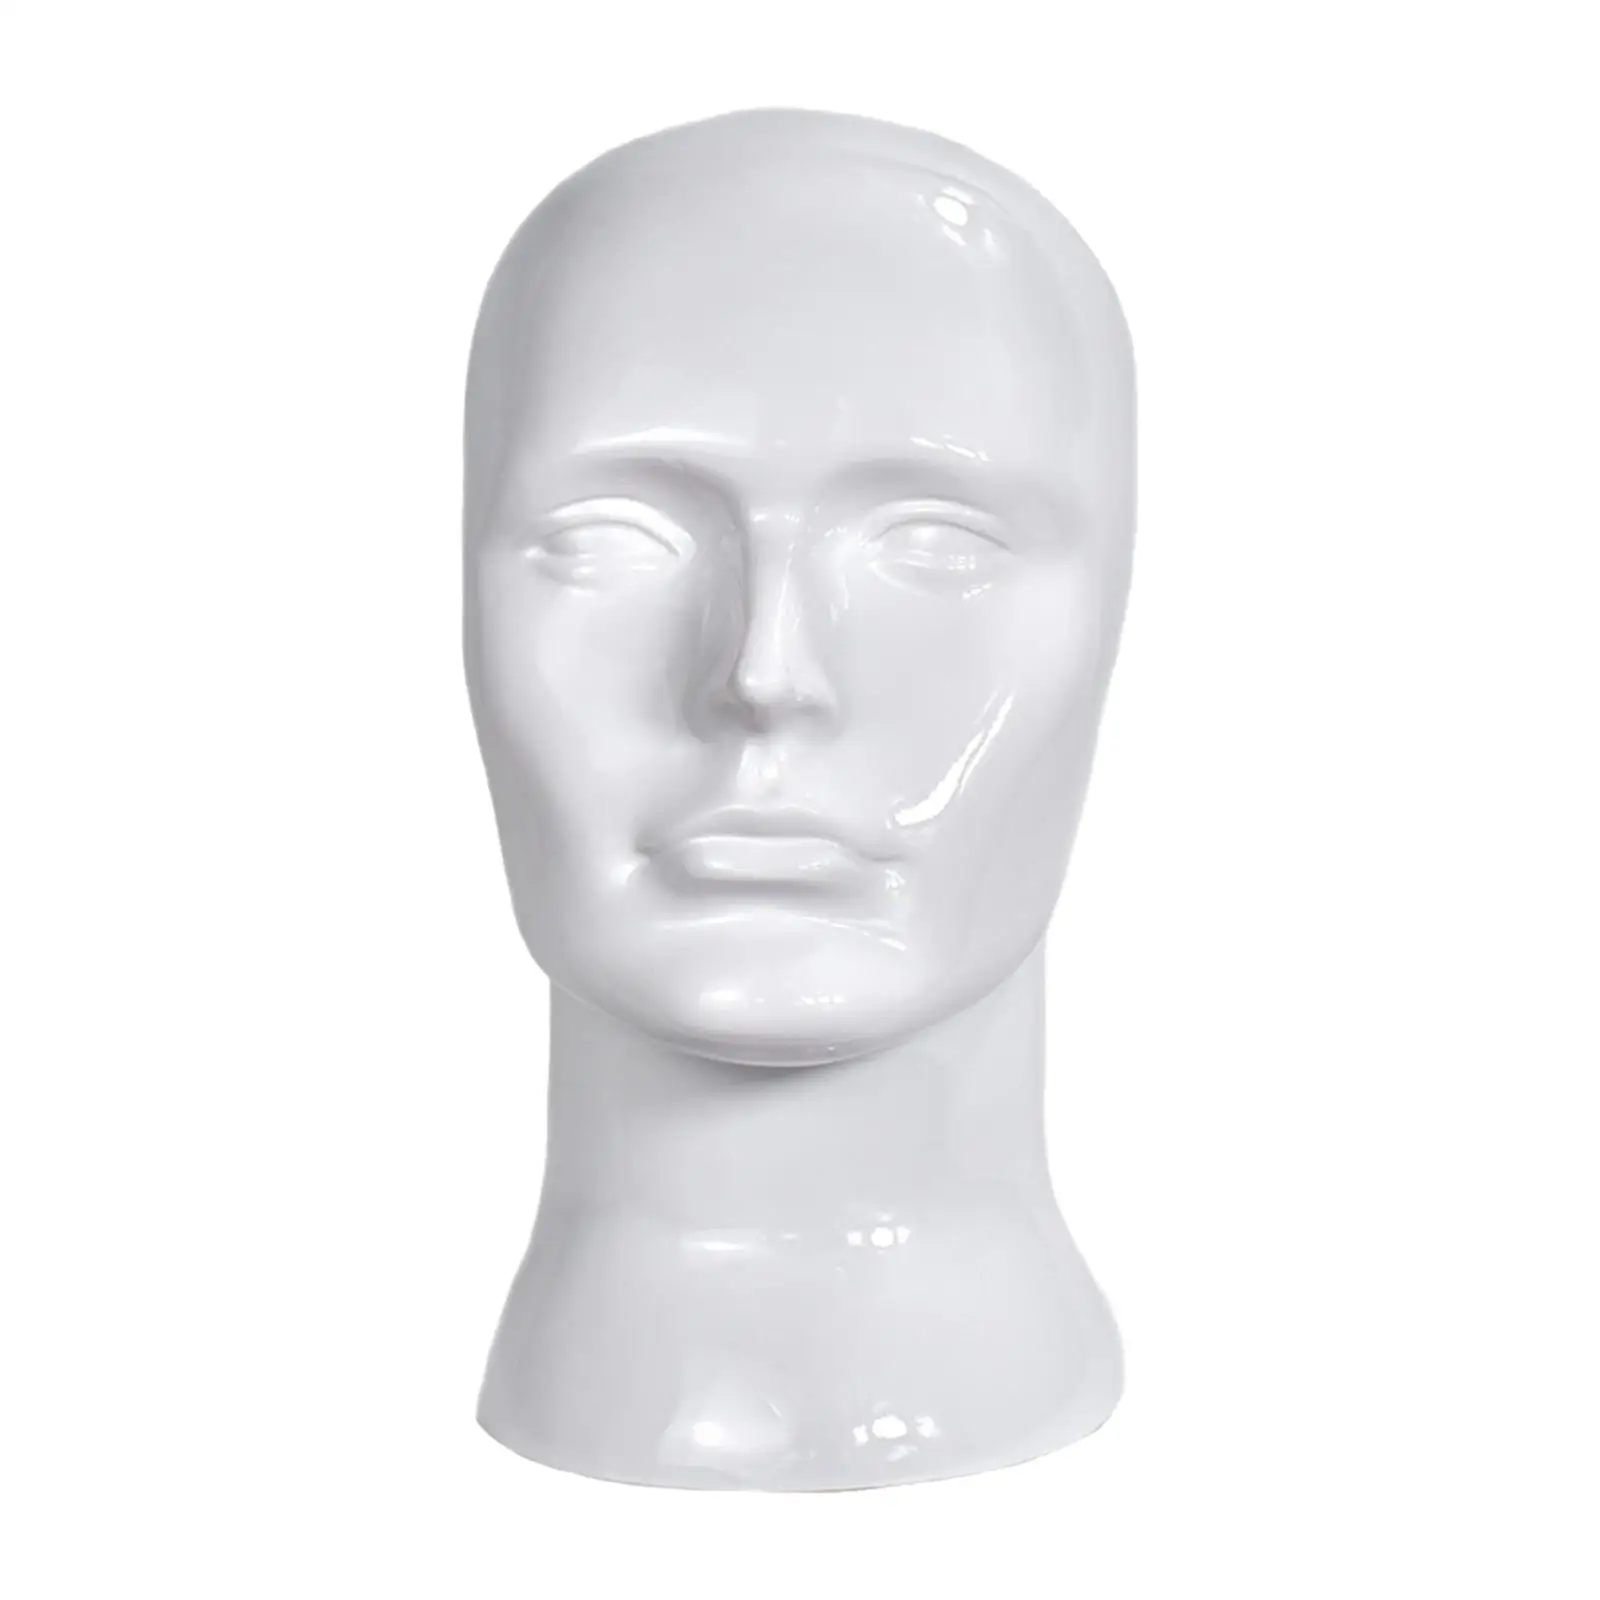 Male Mannequin Head Model, Easy to Carry Lightweight Display Mannequin Head for Home Display Hairpieces Hair Accessories